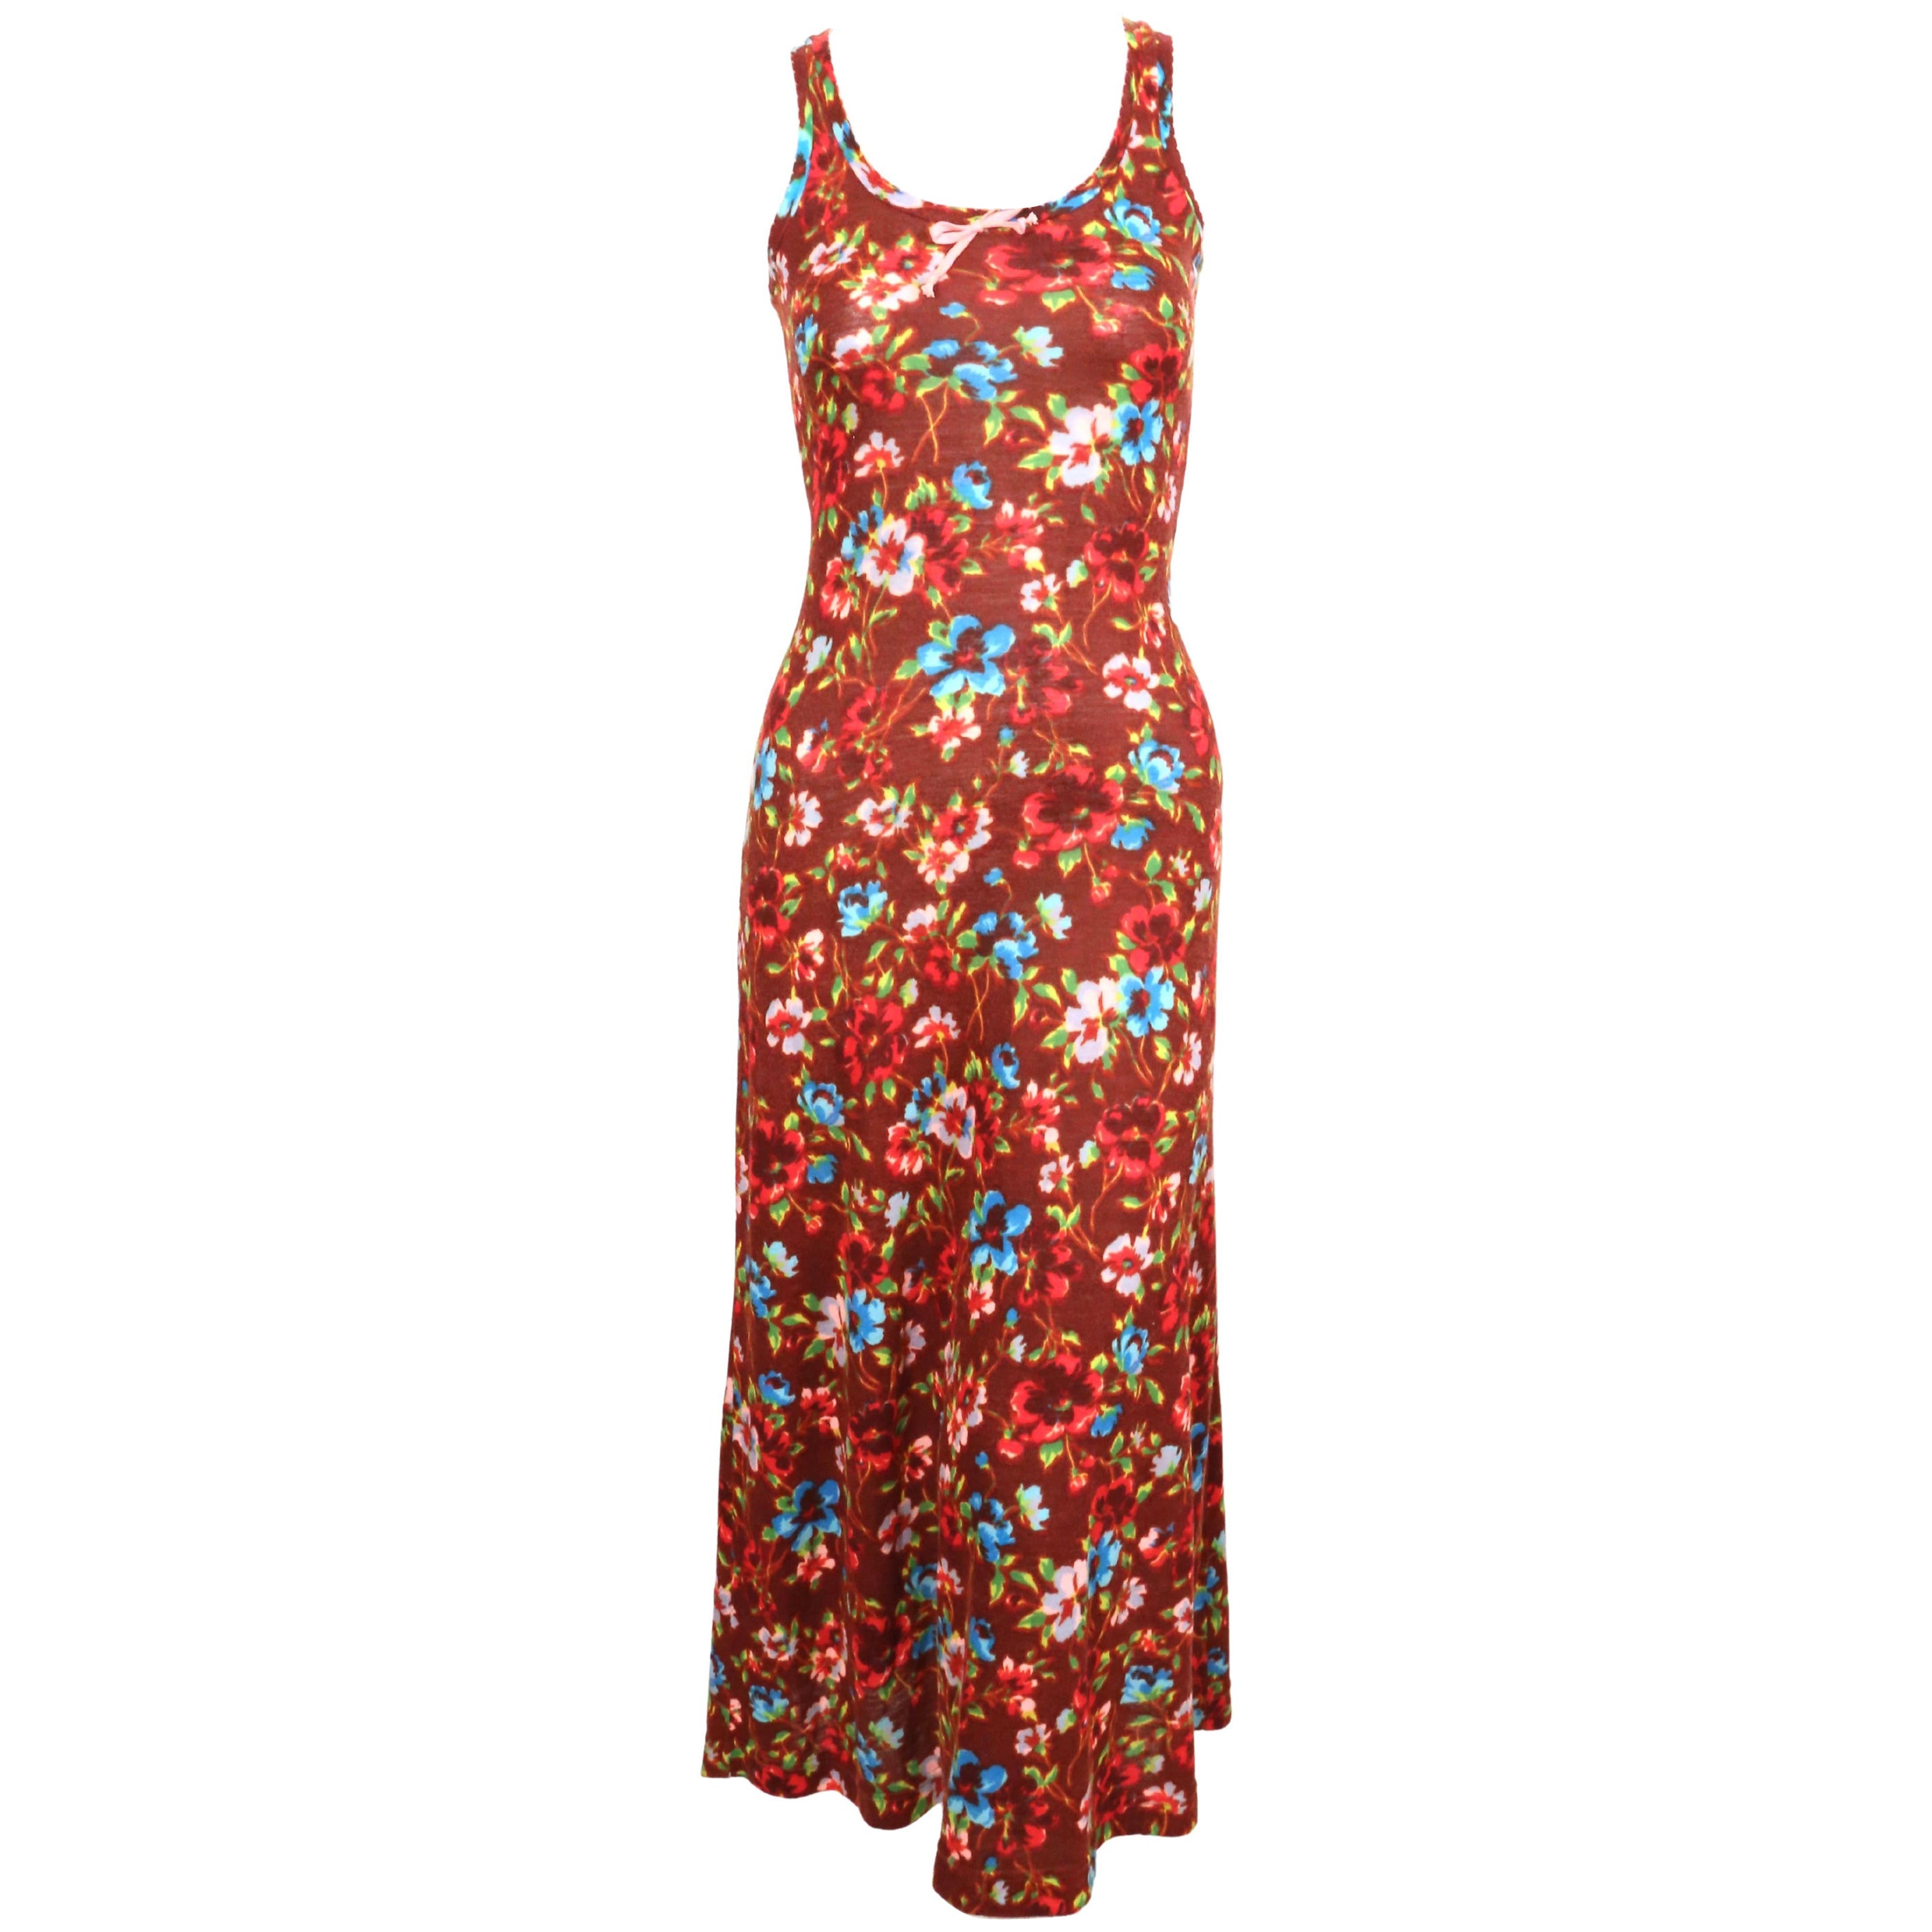 1970's ALLEY CAT by BETSEY JOHNSON floral dress